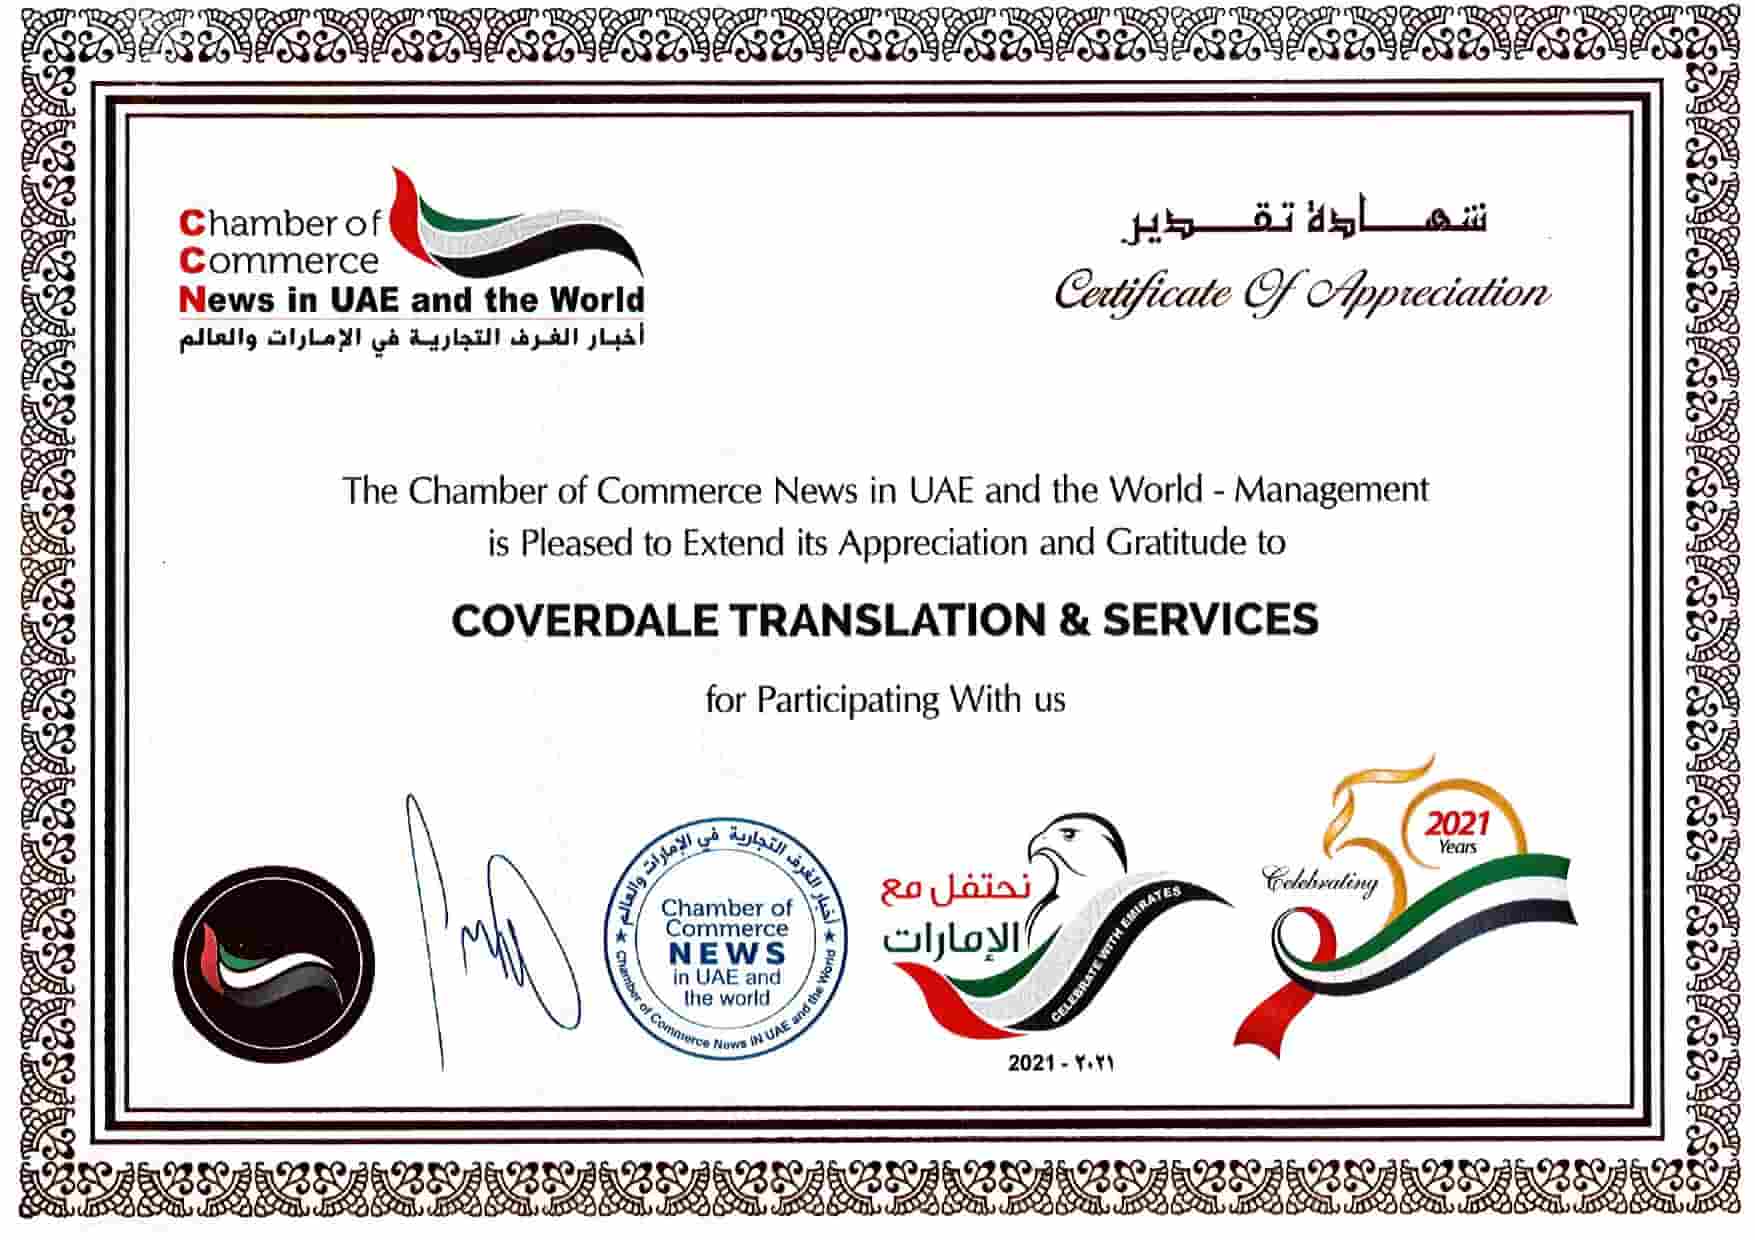 Coverdale Certificate